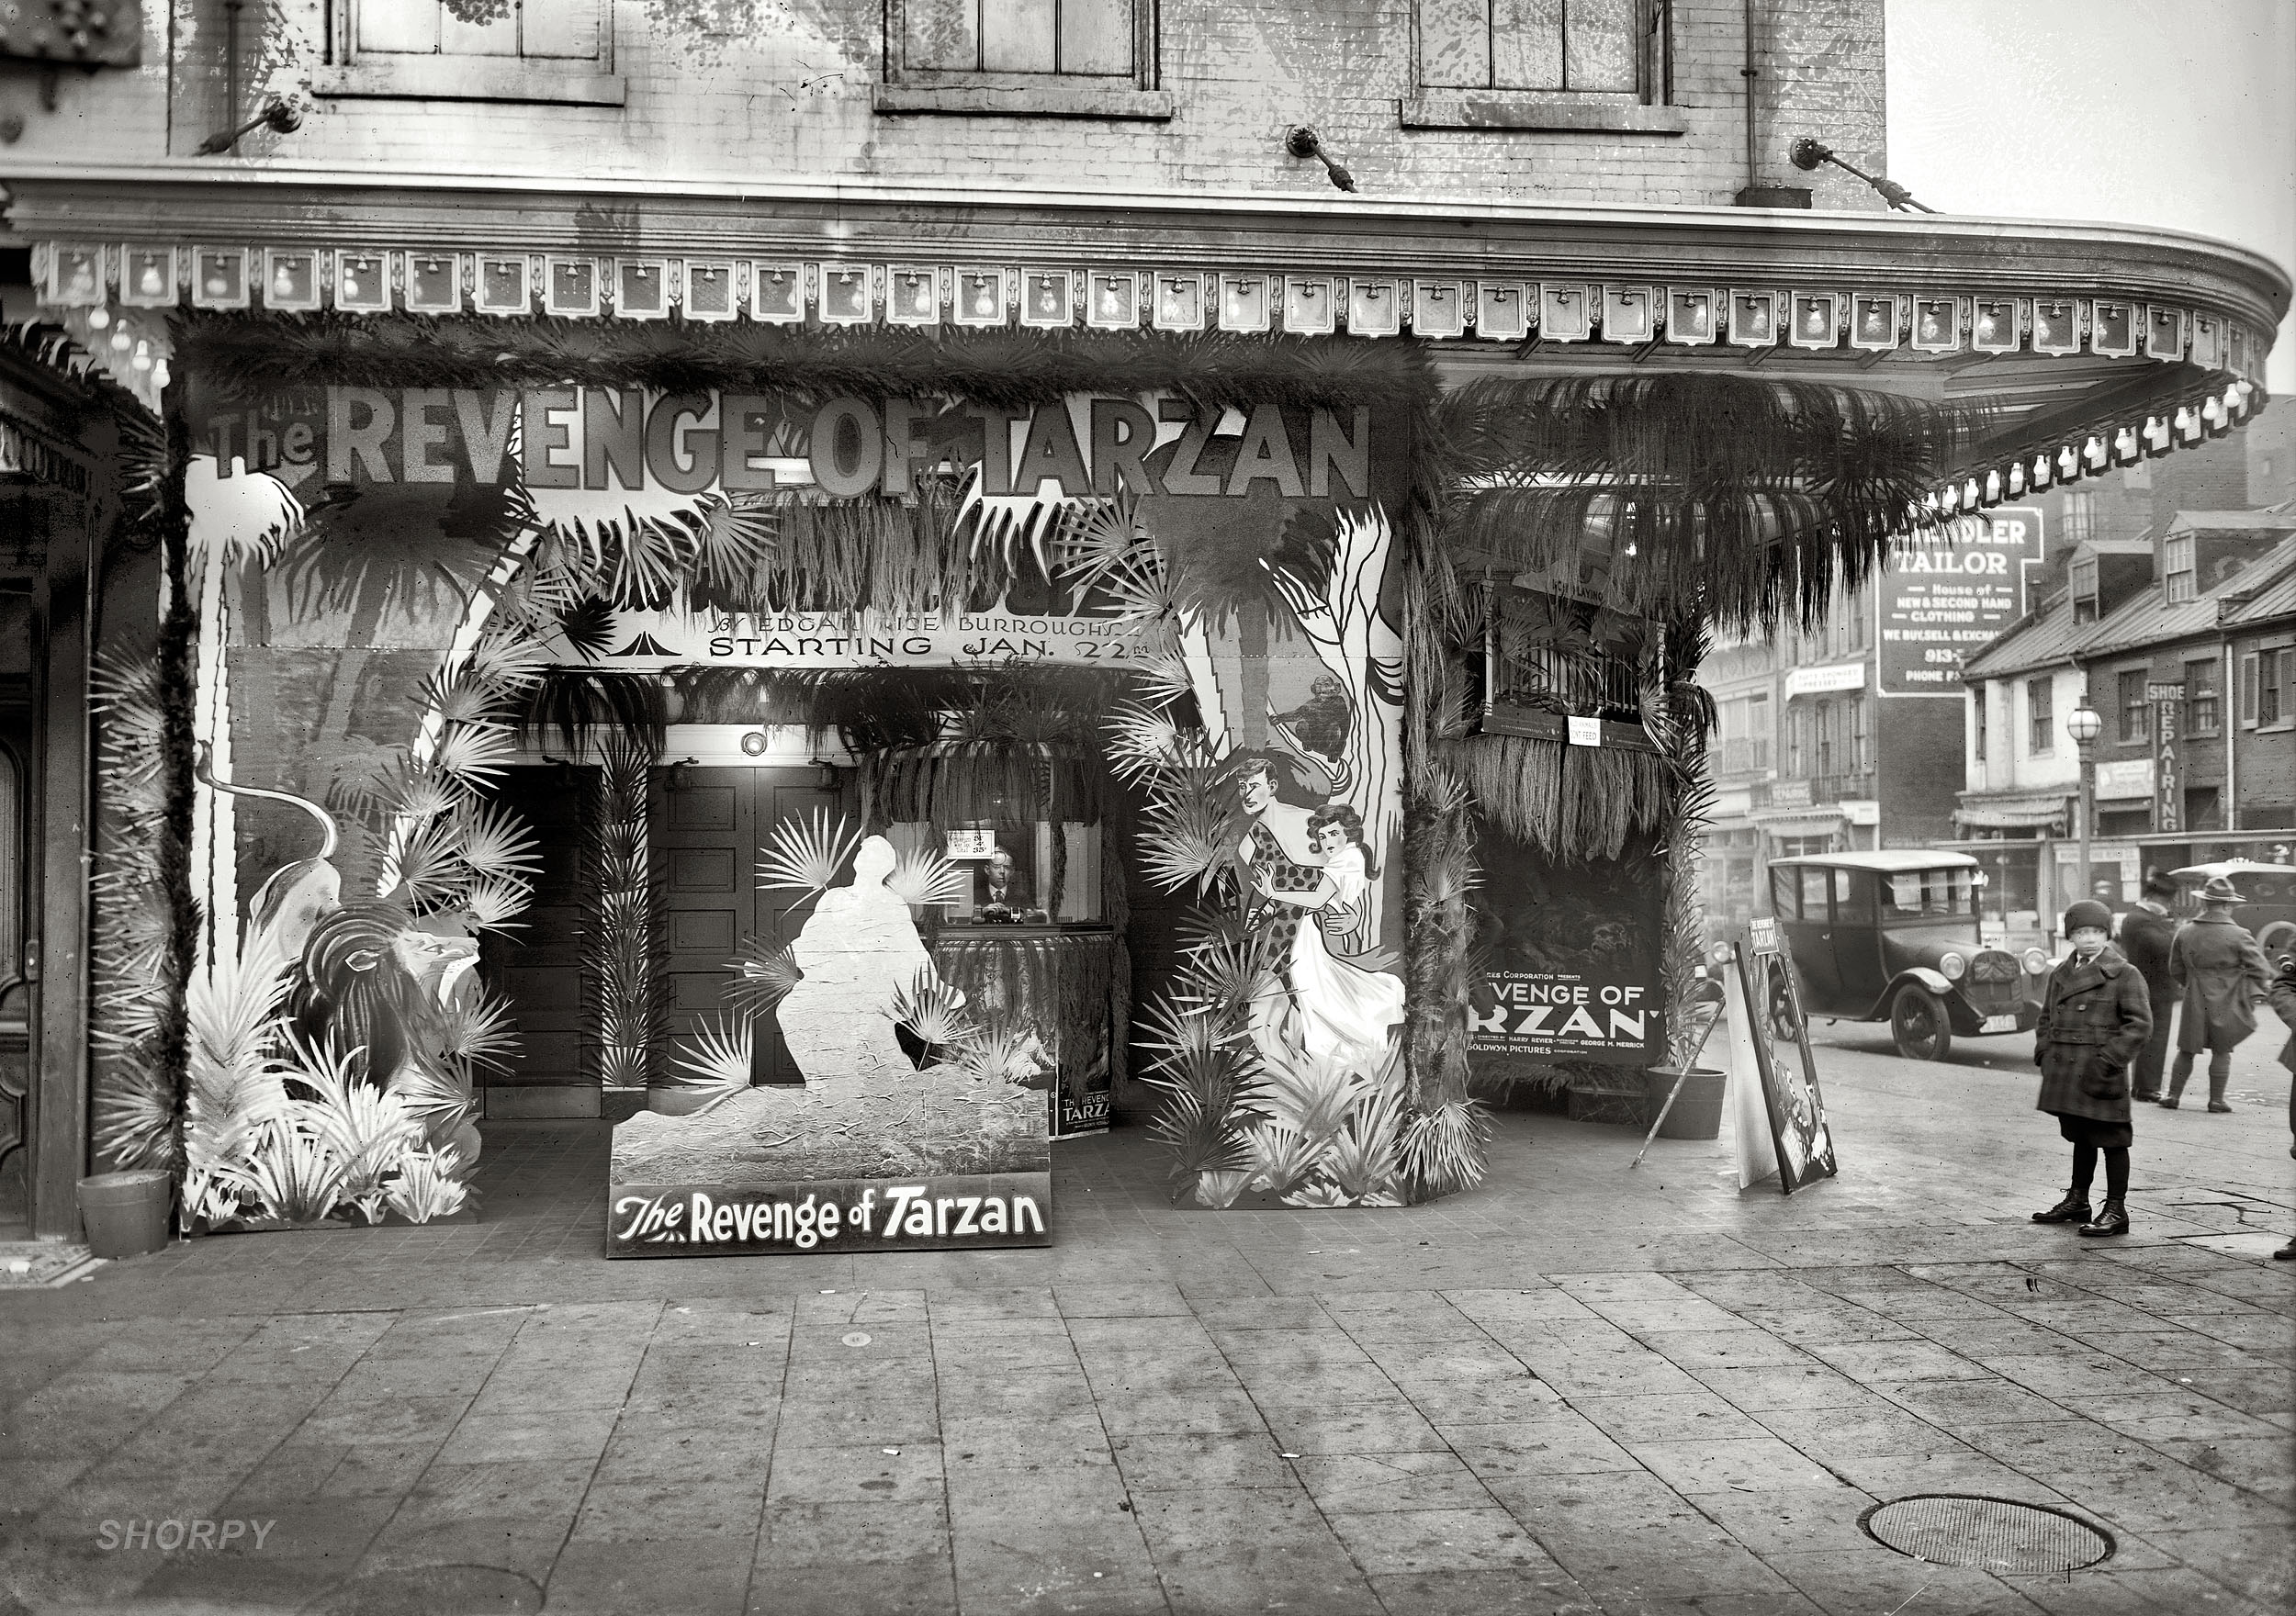 January 1921. The Criterion Theater in Washington, D.C. Now playing: "The Revenge of Tarzan." View full size. National Photo Company glass negative.